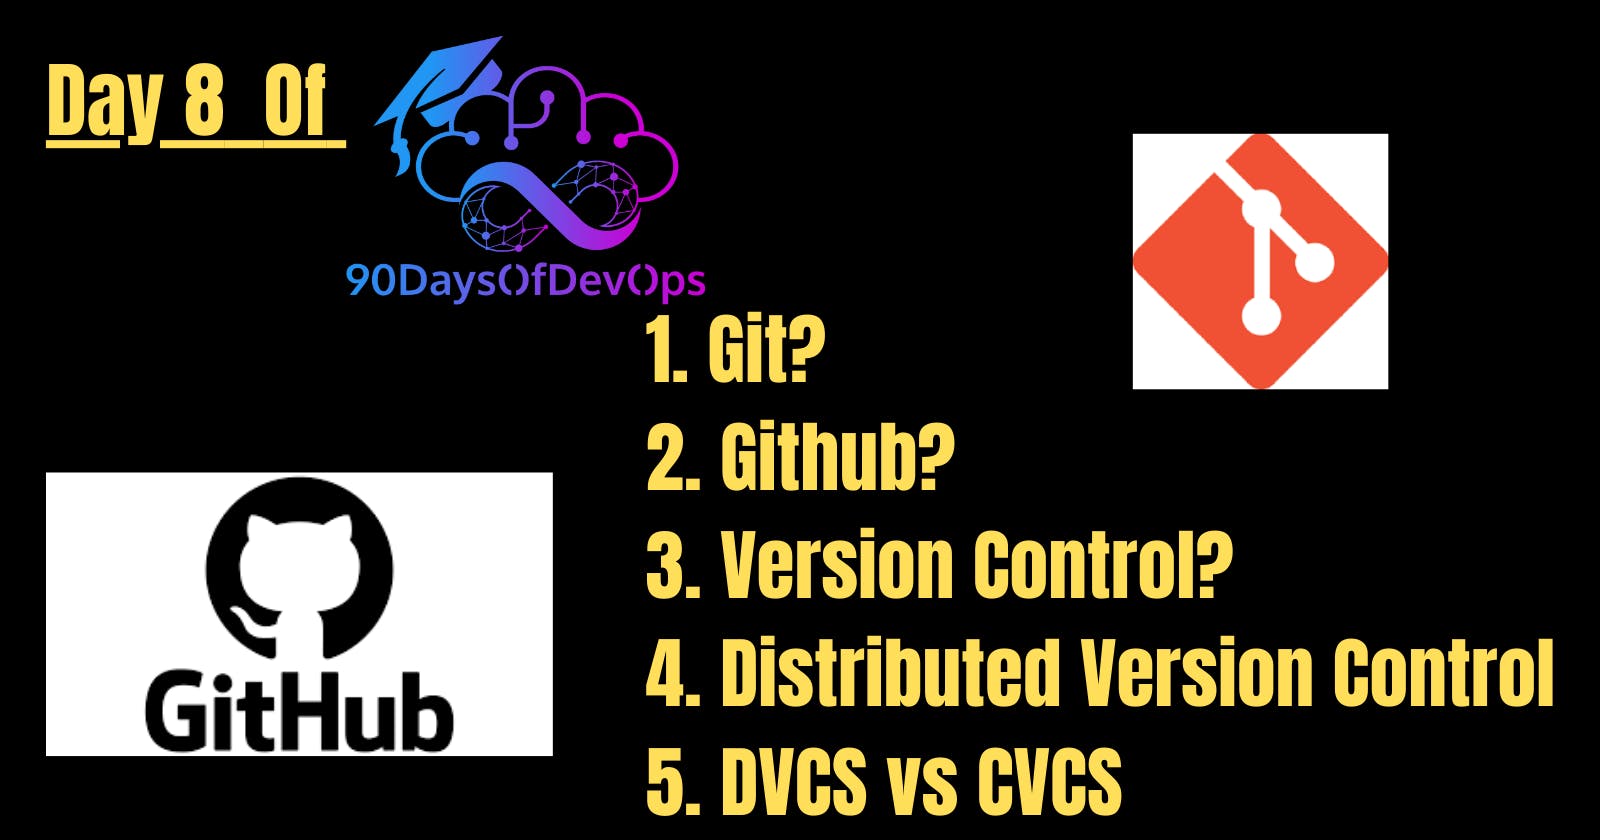 Day8 of 90 Days of DevOps: Mastering the Fundamentals of Git and Github